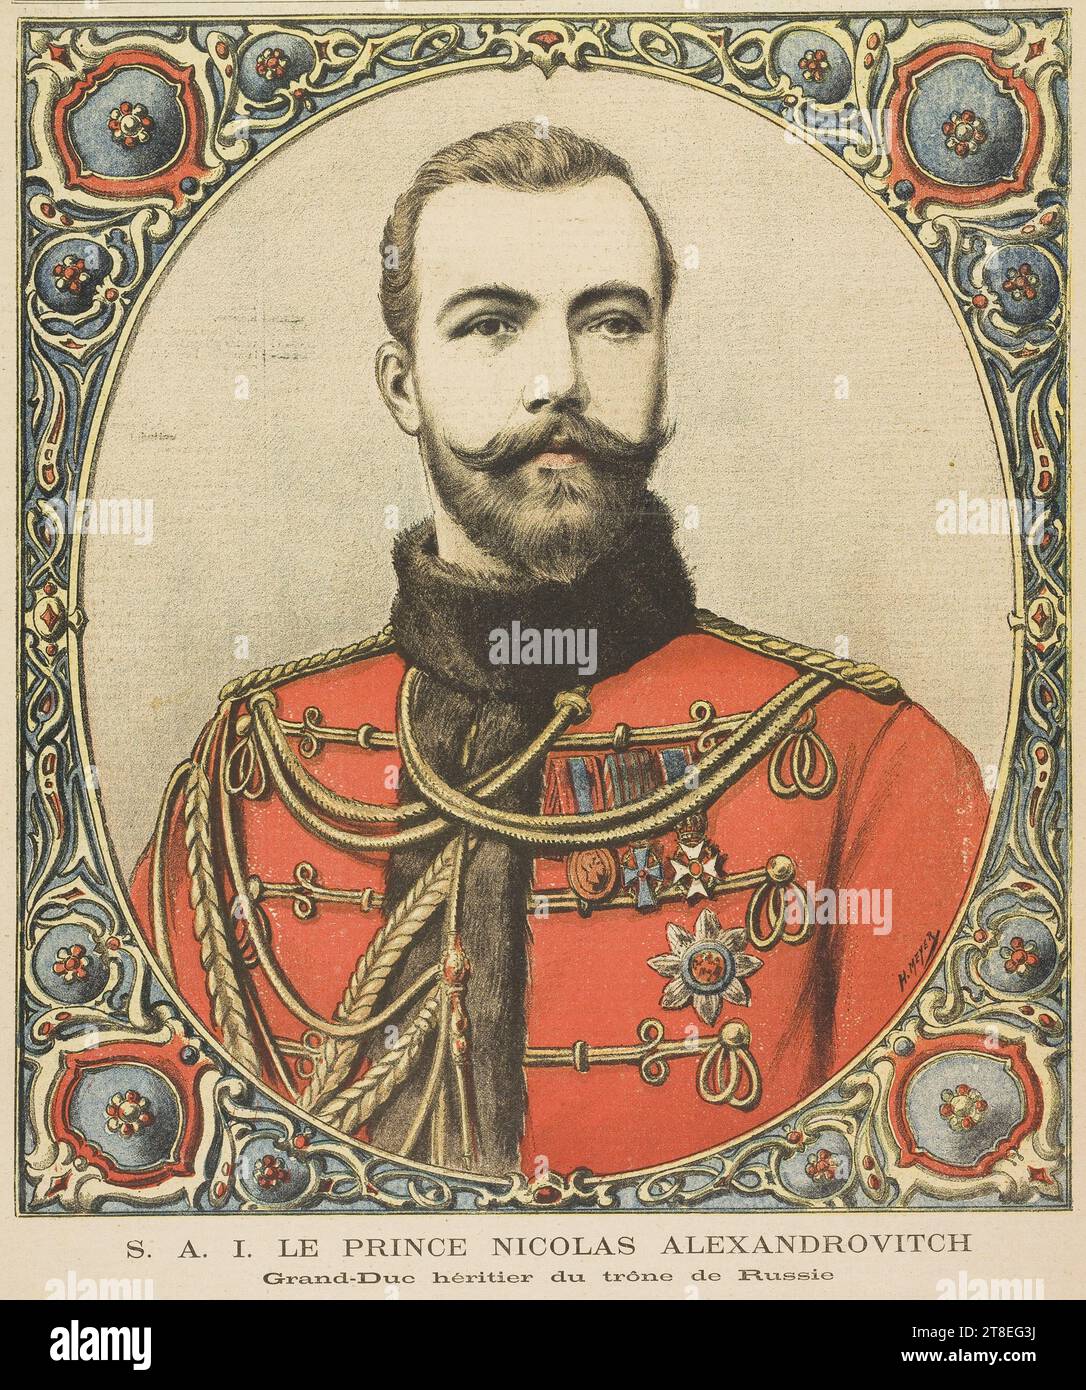 H. MEYER. Fifth year. SUNDAY, NOVEMBER 11, 1894. Number 208. S. A. I. PRINCE NICOLAS ALEXANDROVICH Grand Duke heir to the throne of Russia Stock Photo